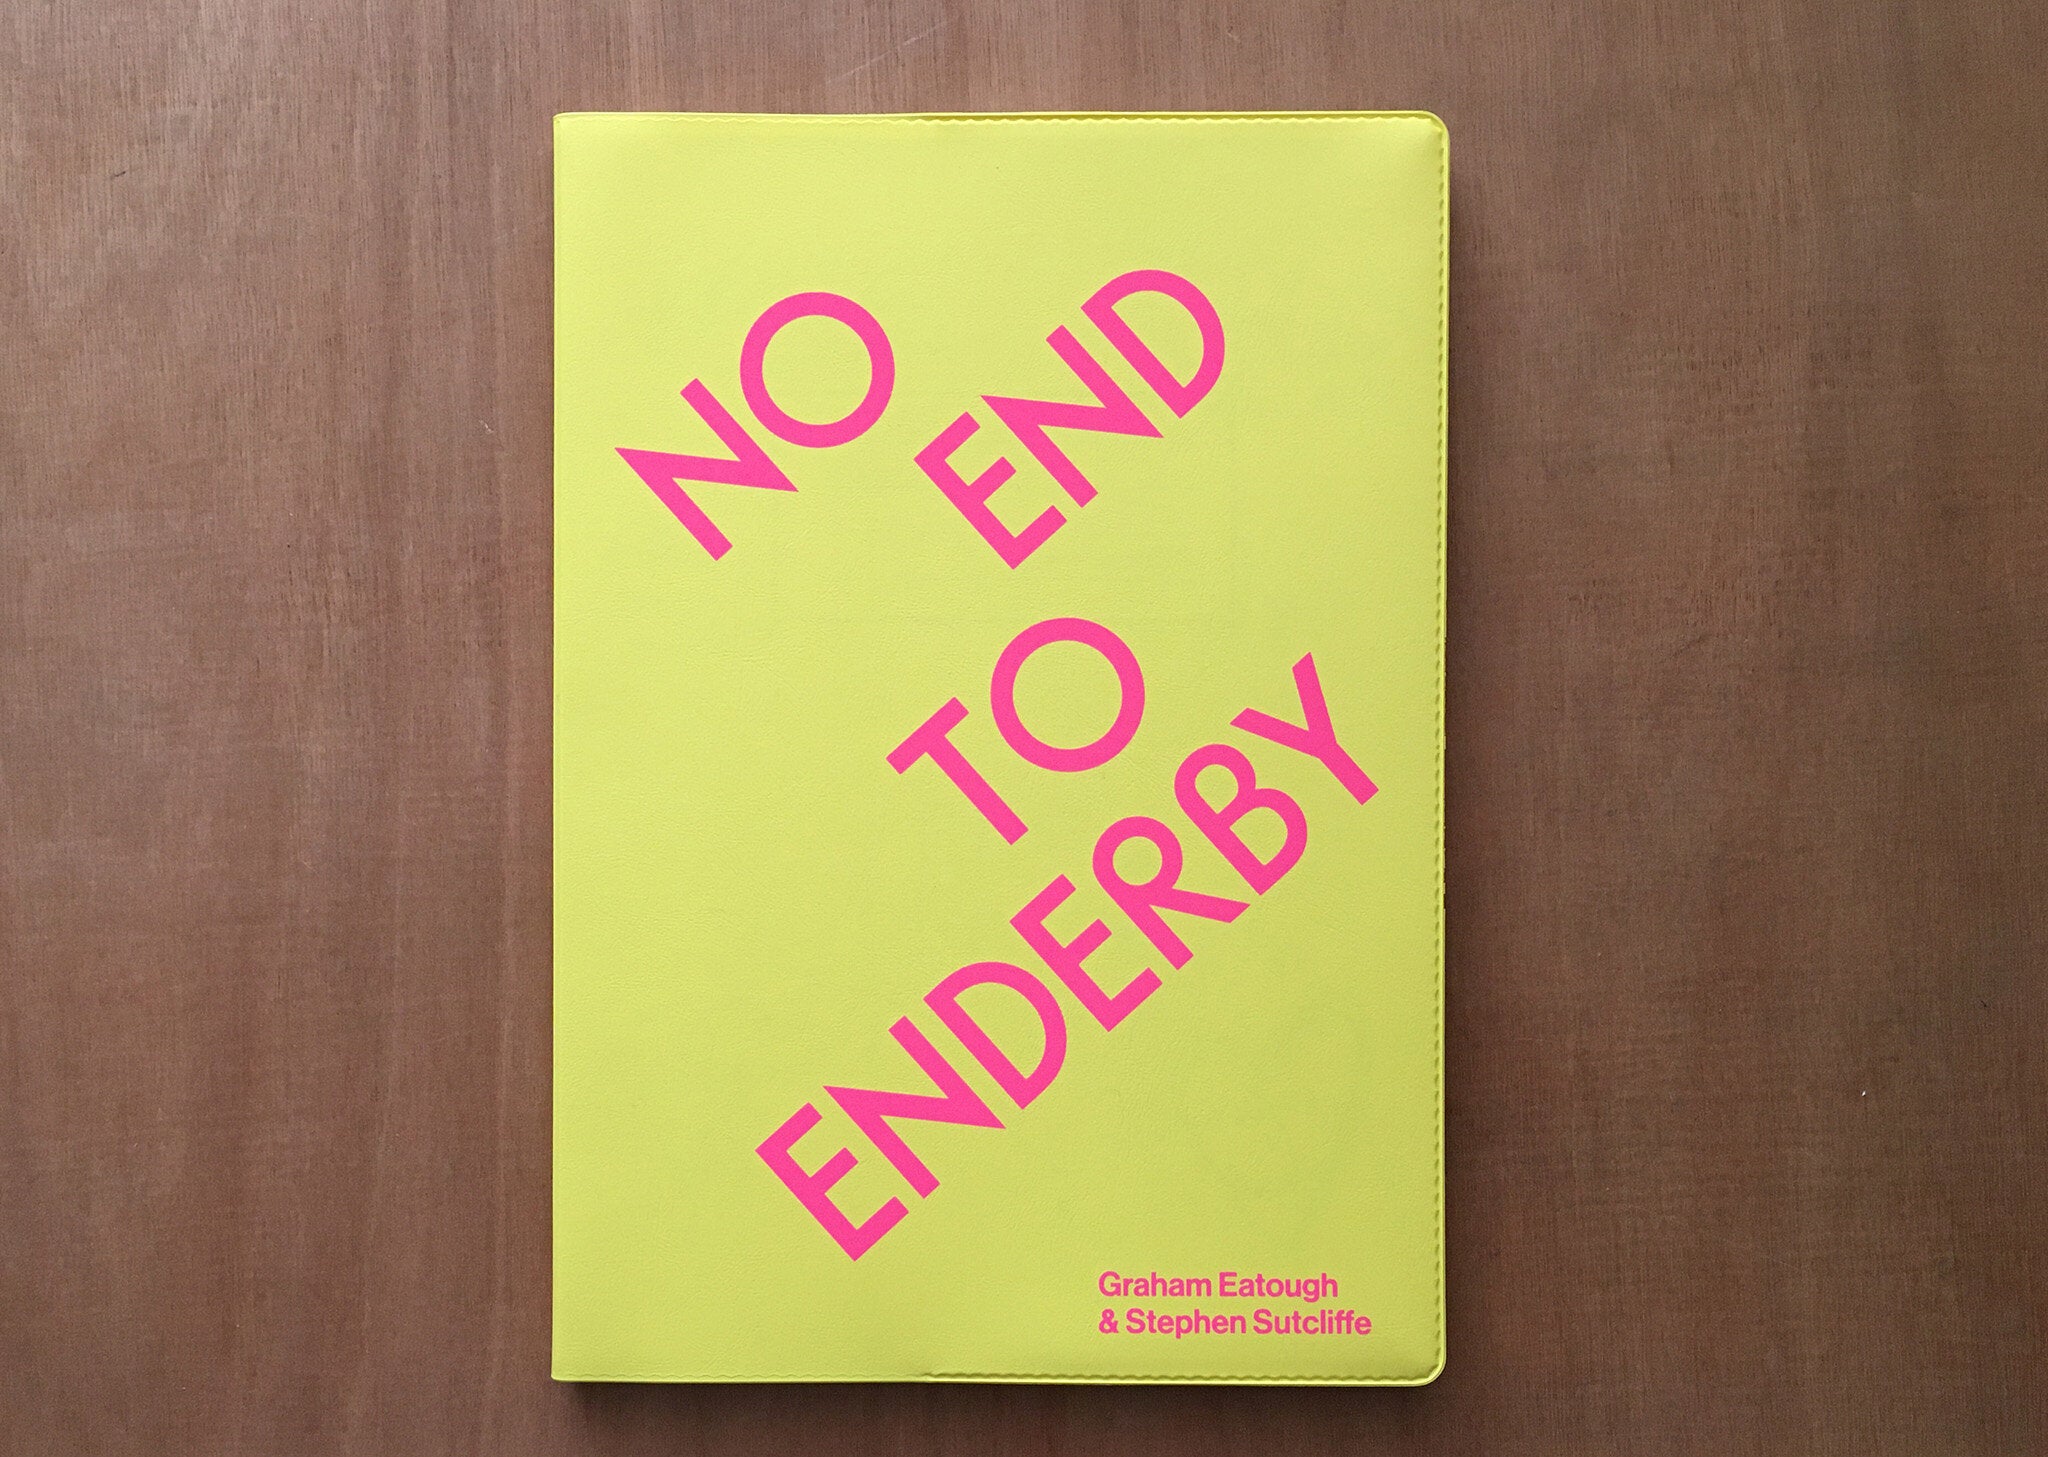 NO END TO ENDERBY by Graham Eatough and Stephen Sutcliffe